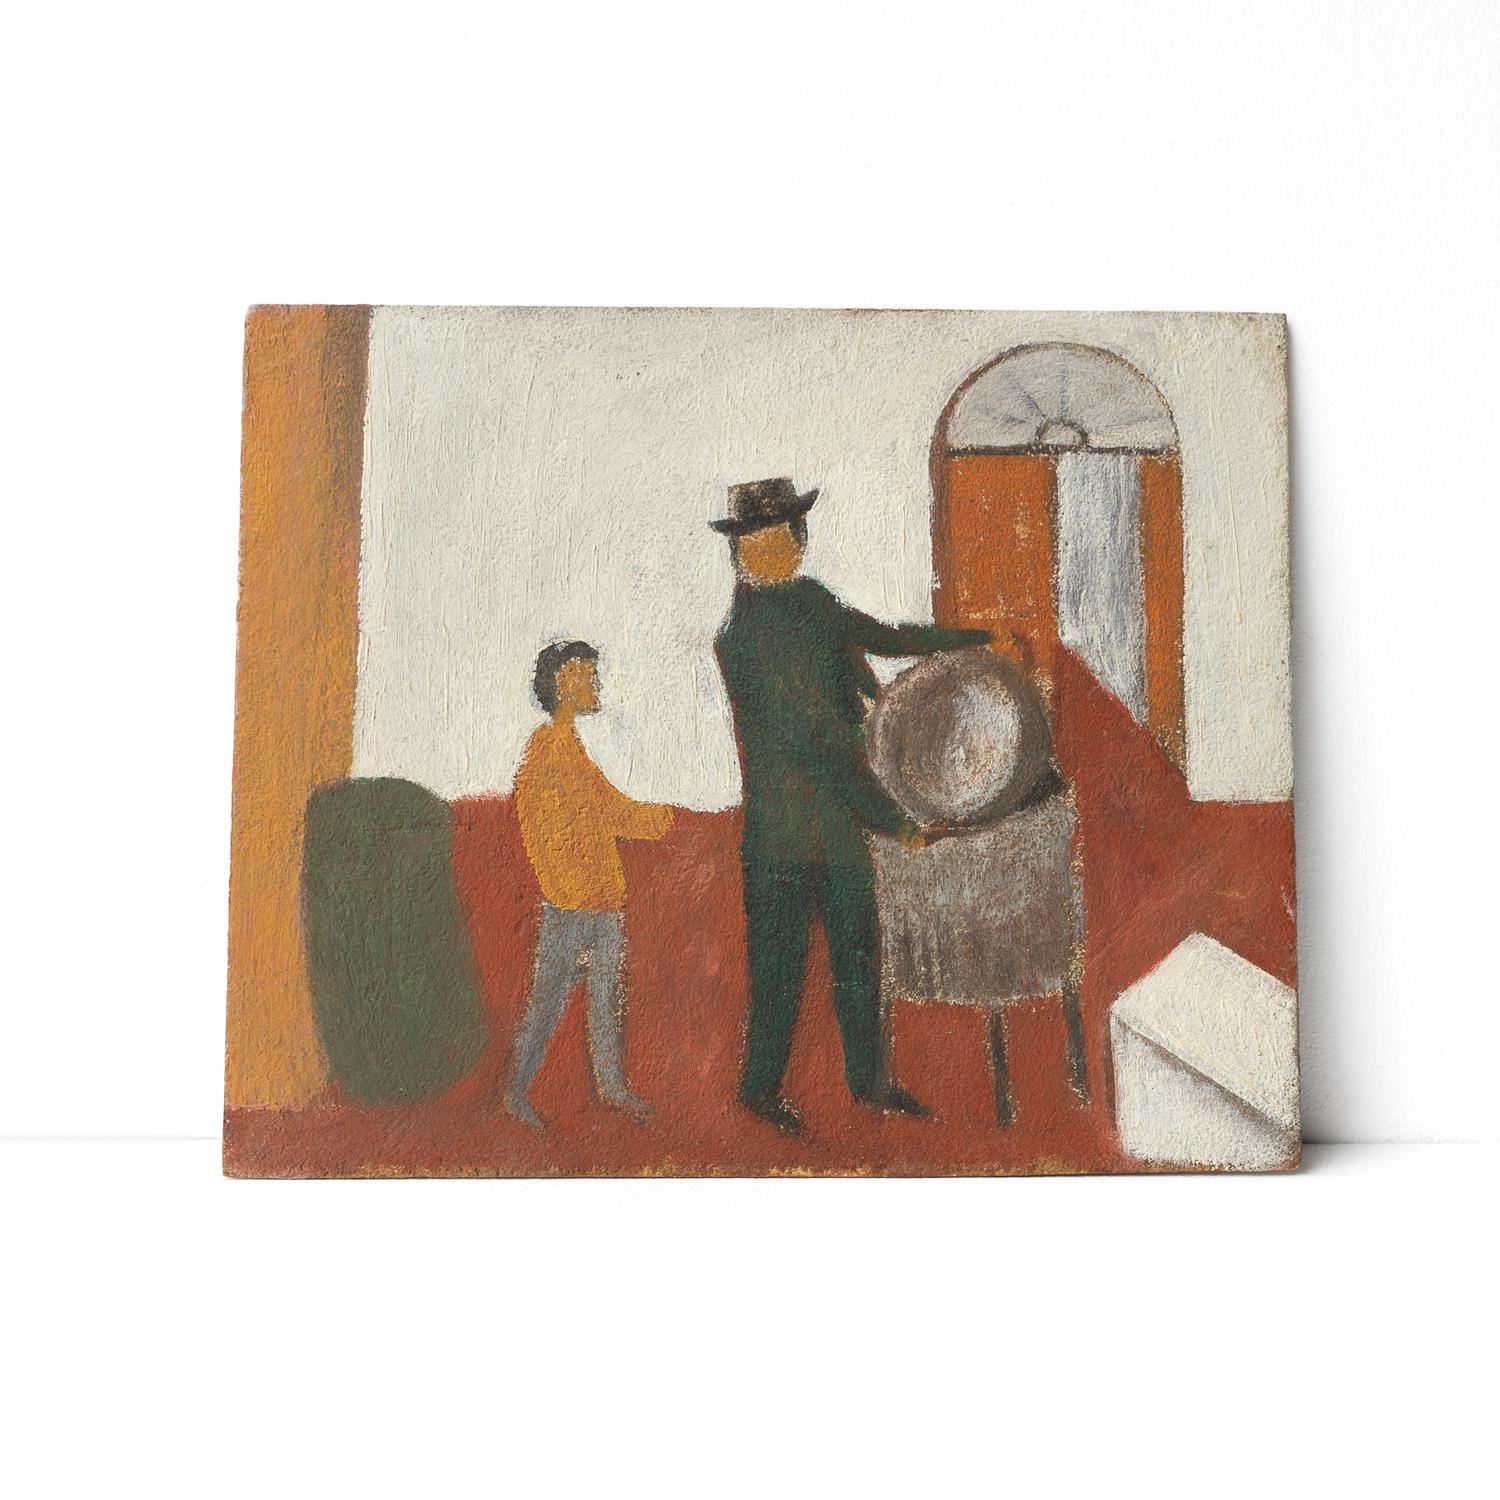 ORIGINAL OIL ON PANEL PORTRAIT PAINTING

Depicting two figures, an adult with a hat on and a child in an Italian interior performing some form of domestic task.

Painted in a naive, almost childlike style with simple lines and blocks of colour in